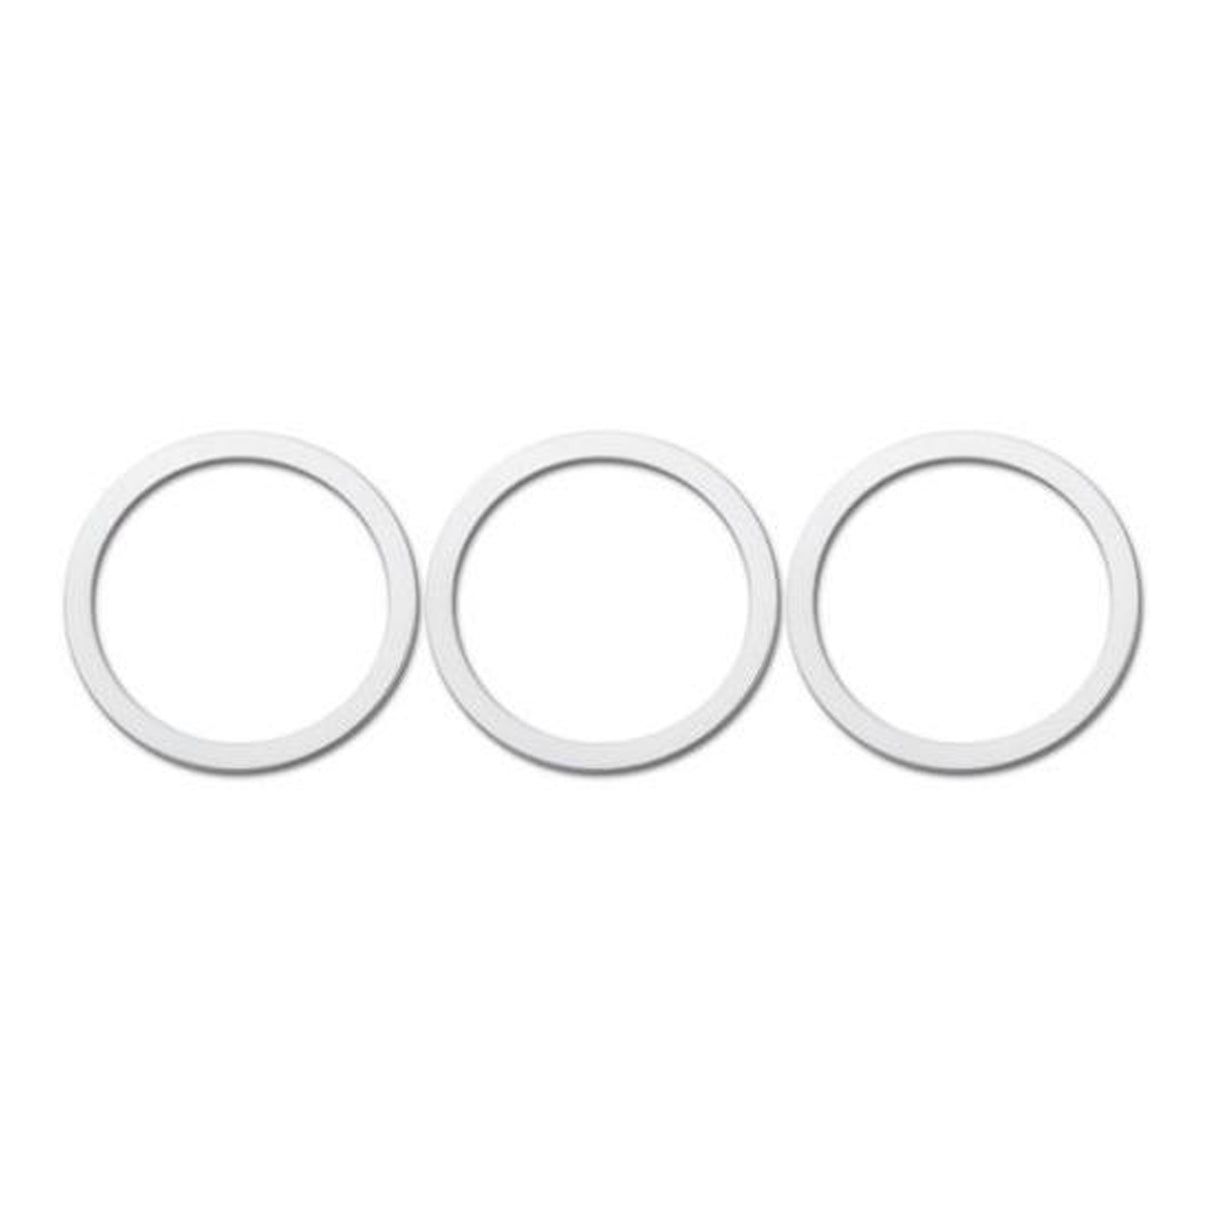 3-Pack of O-Ring Seals for the Personal Blender® Blade Assemblies.